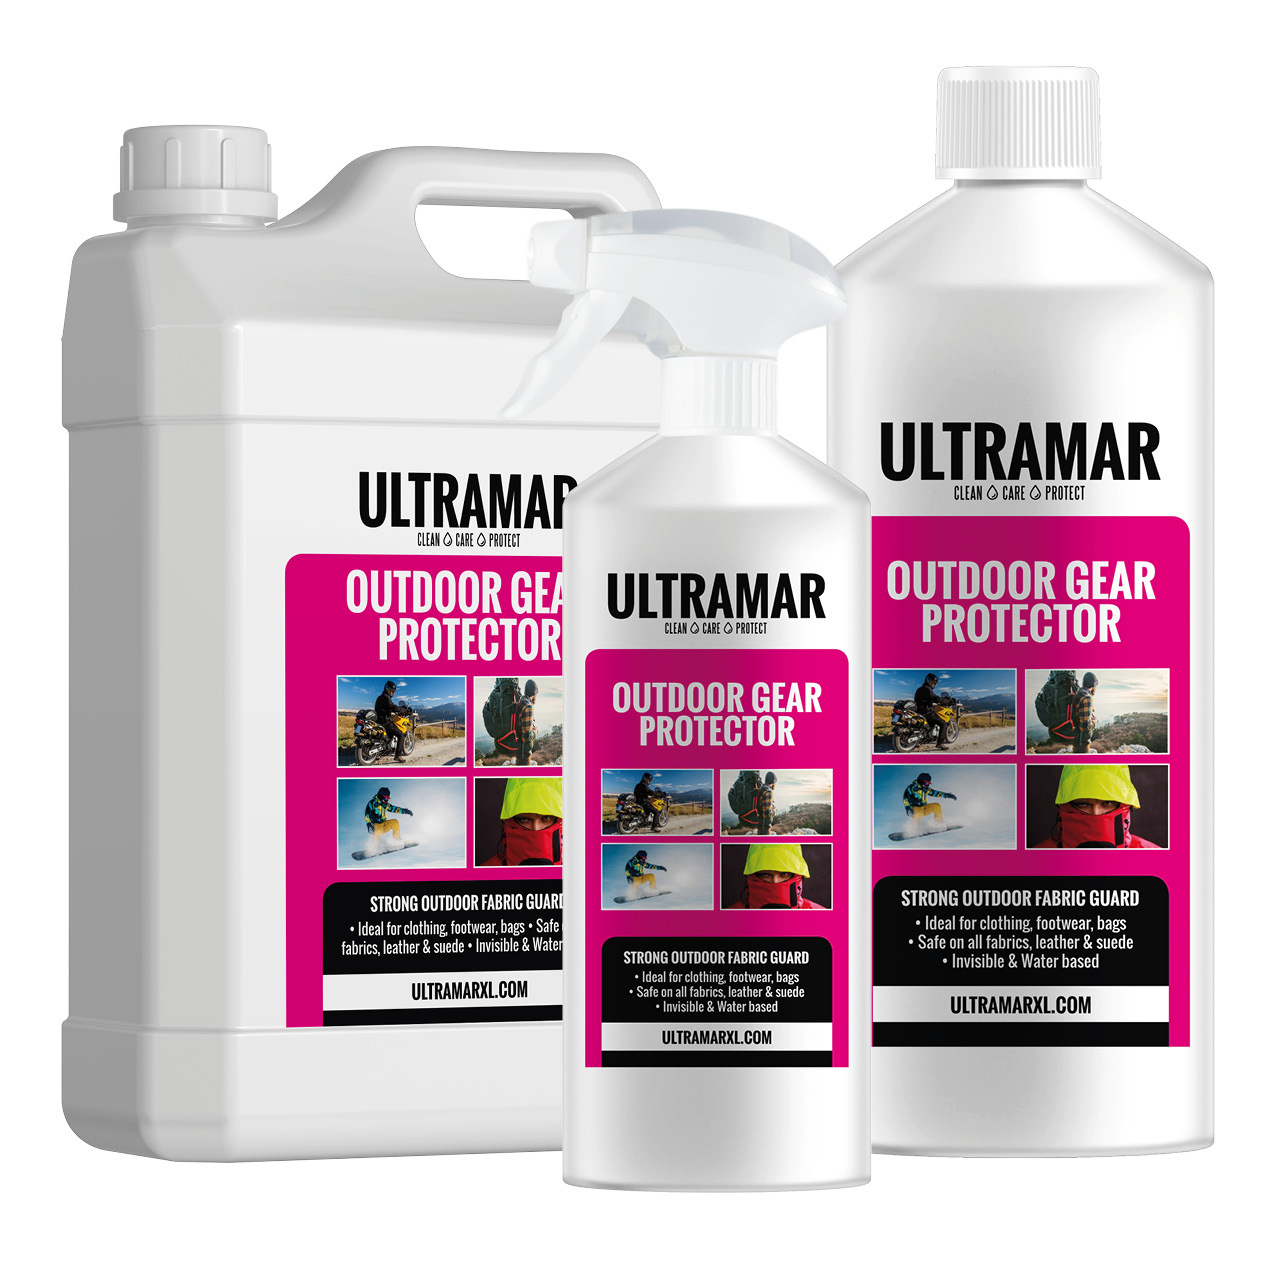 Outdoor Gear Protector Ultramar 2.5 liter Car & Boat Products